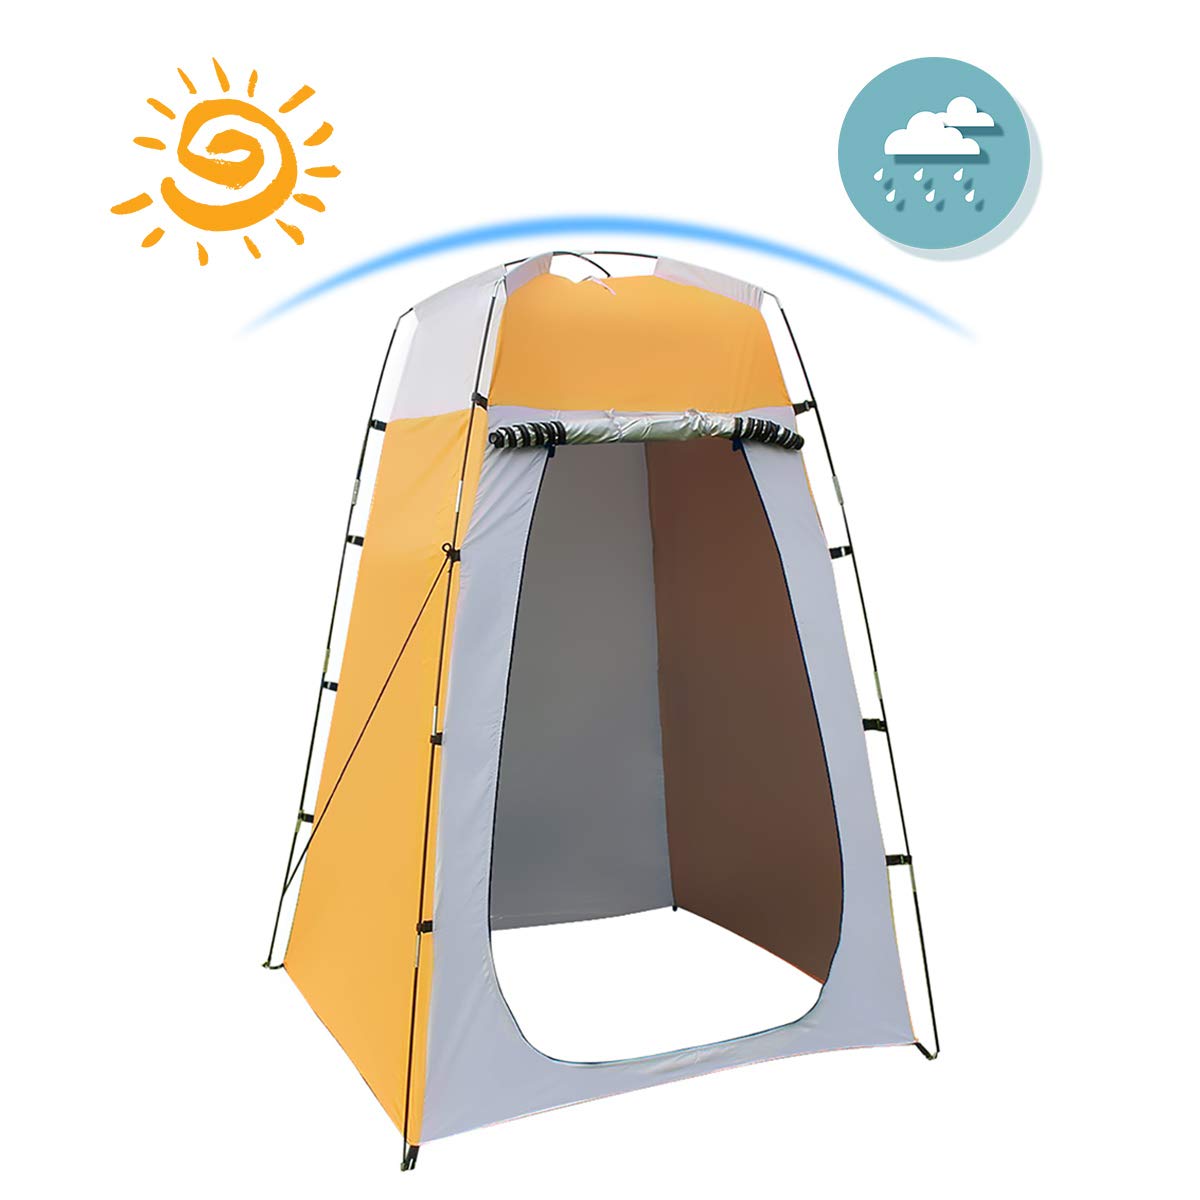 Outdoor Privacy Tent Dressing Waterproof Portable Up Toilet Tents for Camping Beach Changing Room Shelter Canopy Storage Bag Include Peg N/C Shower Tent 120x120x180 cm Pole Rope 